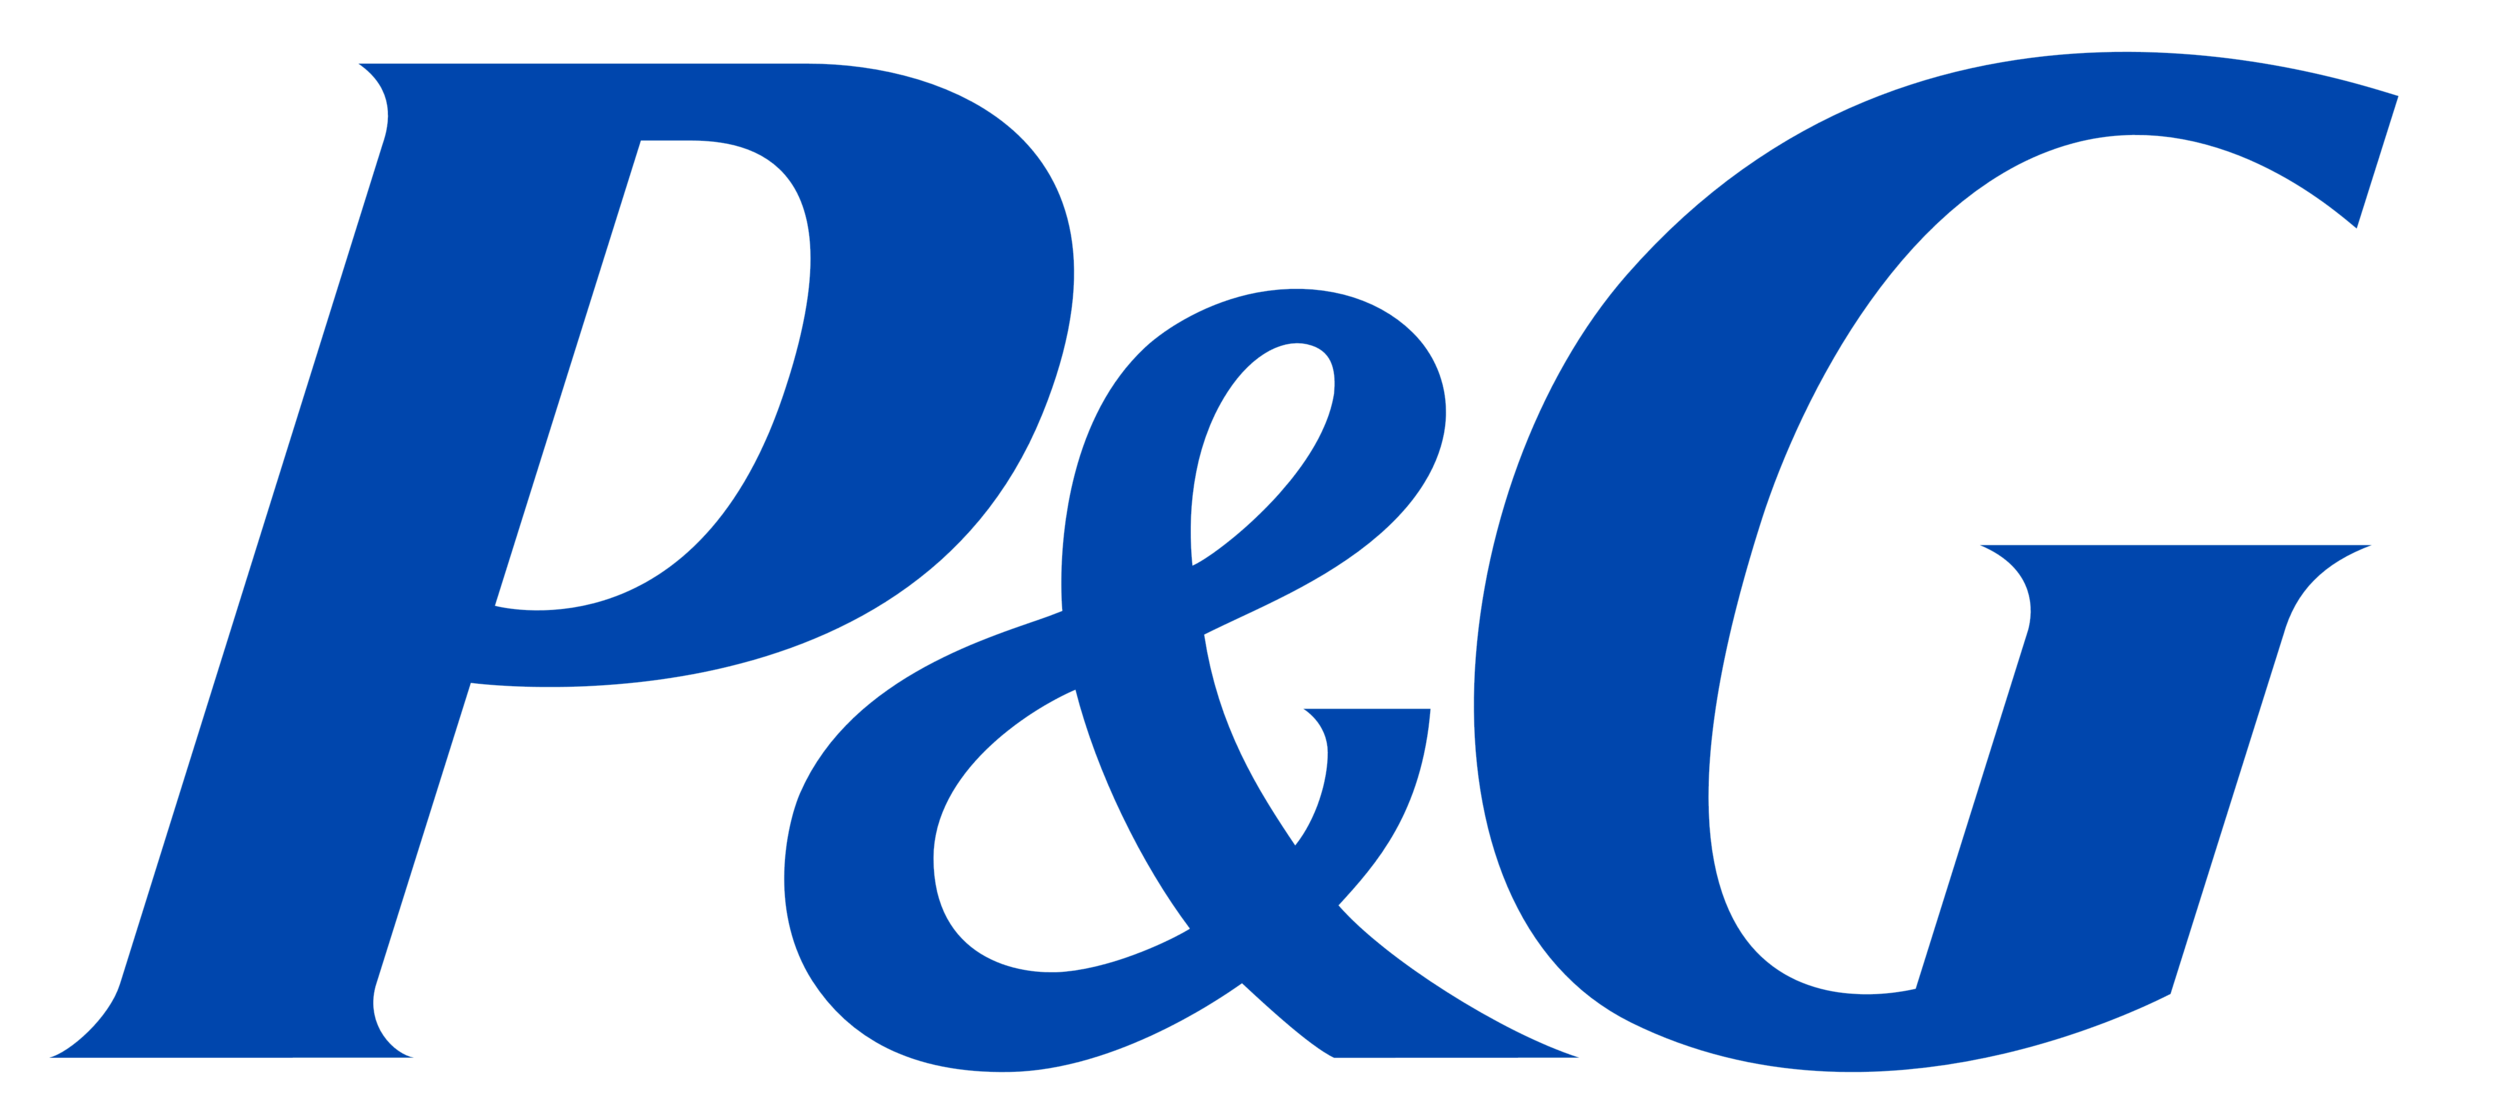 TEGR5MKnQeq2UkTBJe62_P_and_G_Procter_and_Gamble_logo_png.png